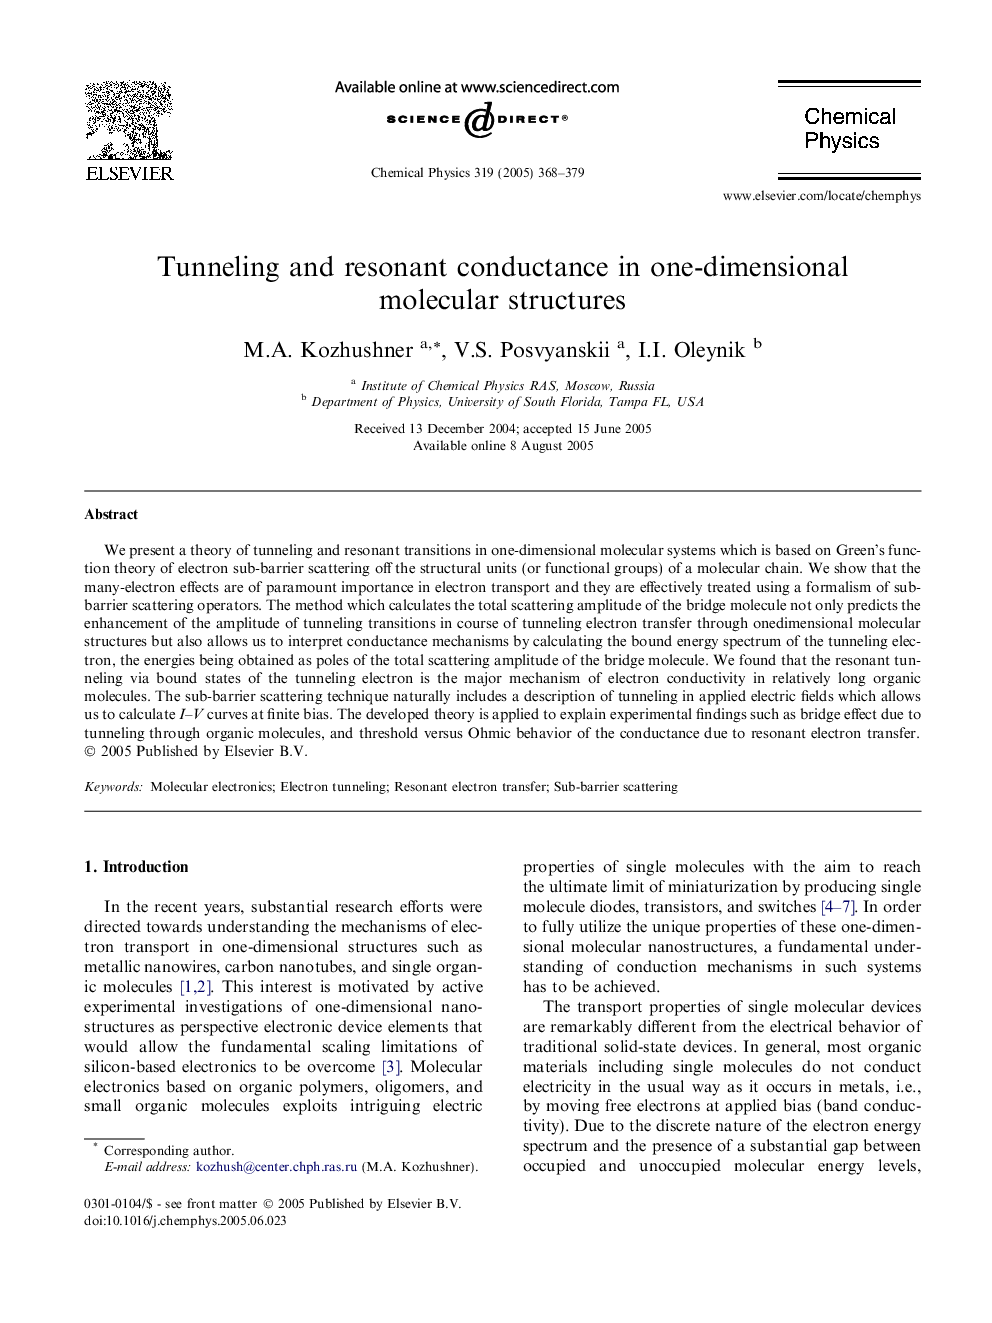 Tunneling and resonant conductance in one-dimensional molecular structures